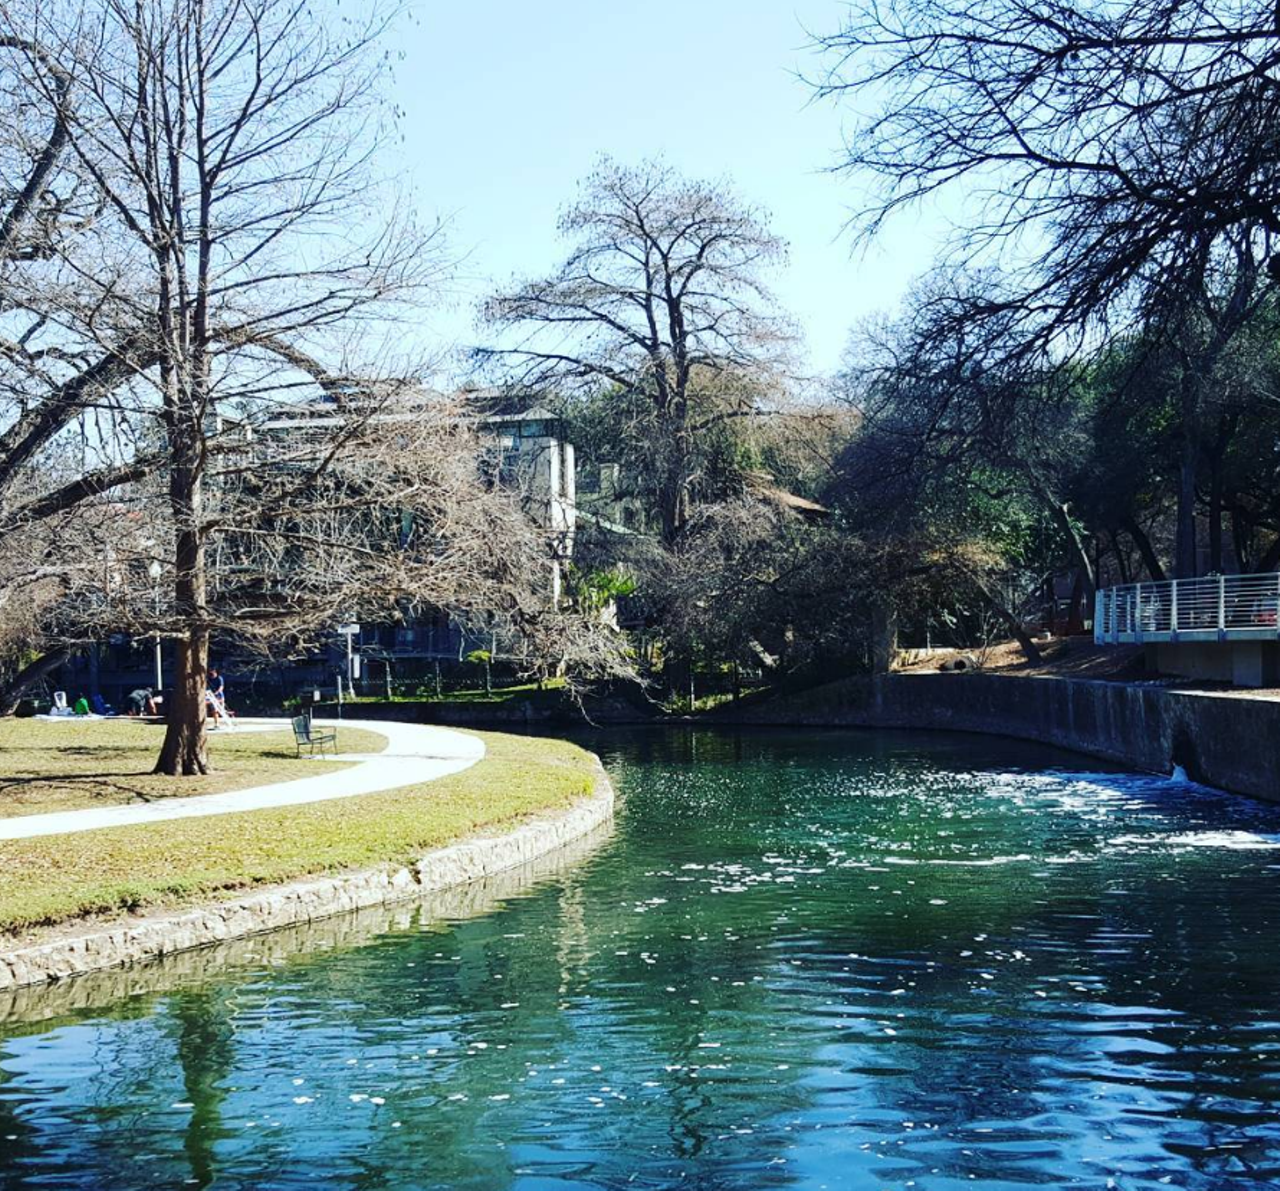 Brackenridge Park
3700 N St. Mary&#146;s St., (210) 207-8480
From trails to picnic areas to fishing in the trout-stocked San Antonio River, this riverside park is one of San Antonio&#146;s best places for outdoor activities.
Instagram/@aduran8907